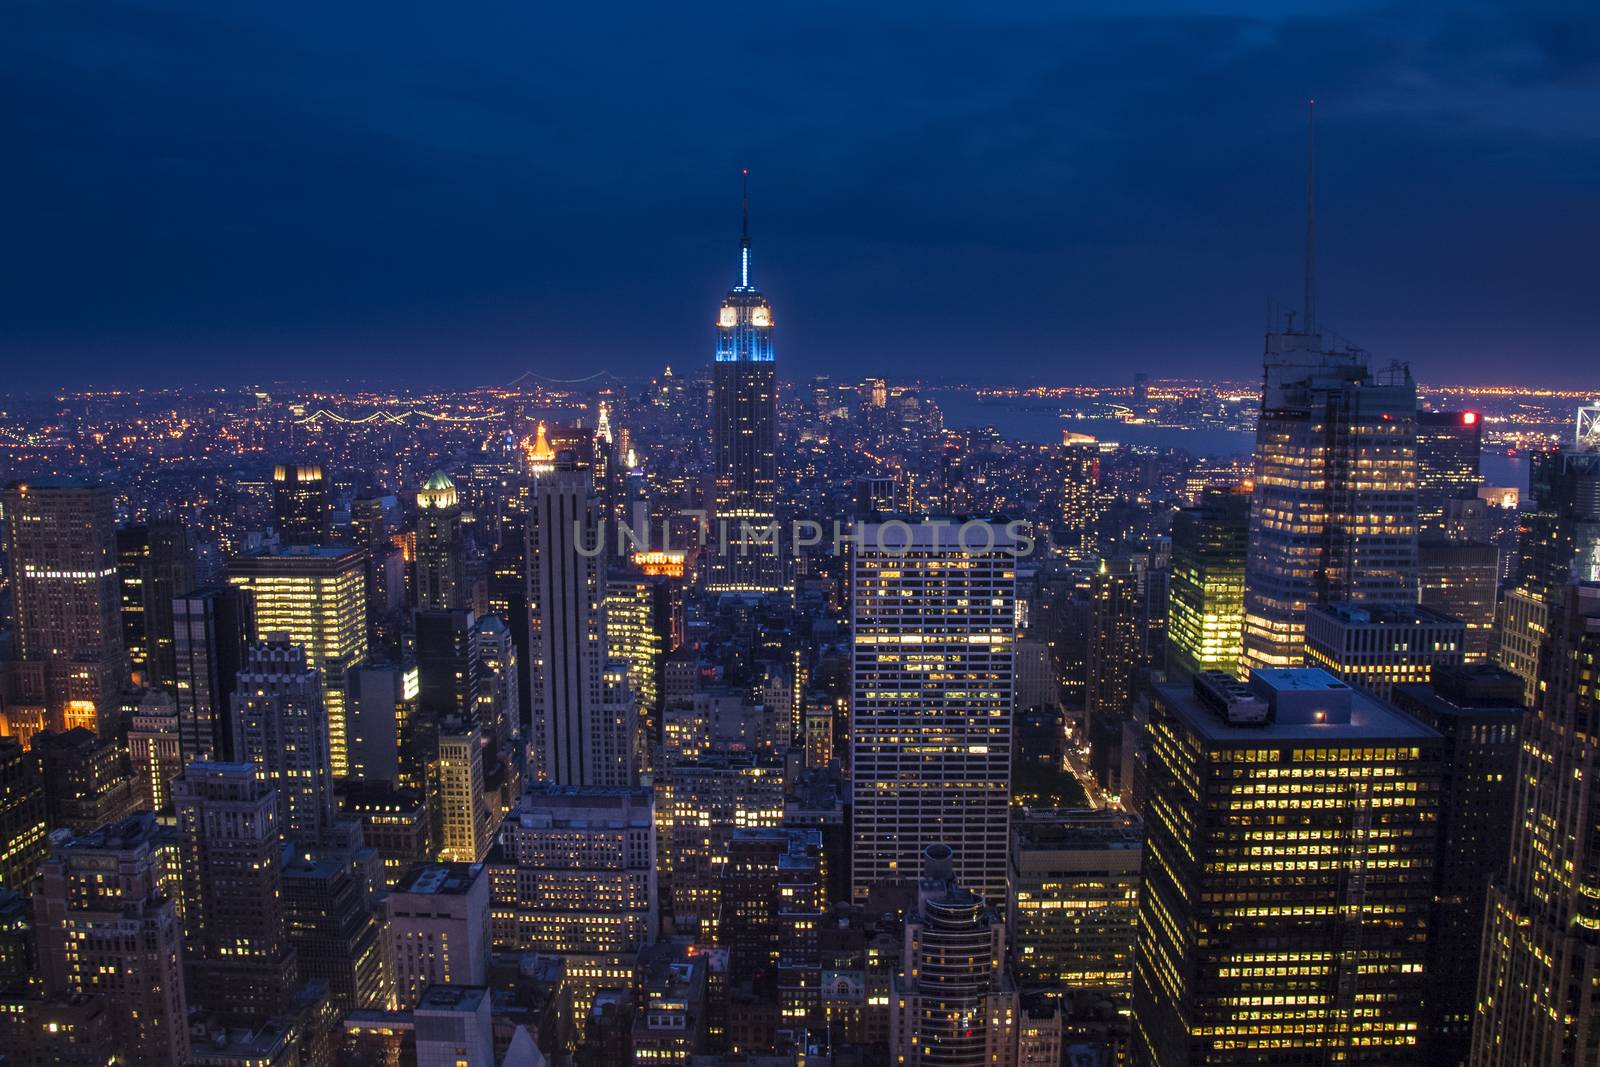 New York City with skyscrapers in the blue hour by tanaonte